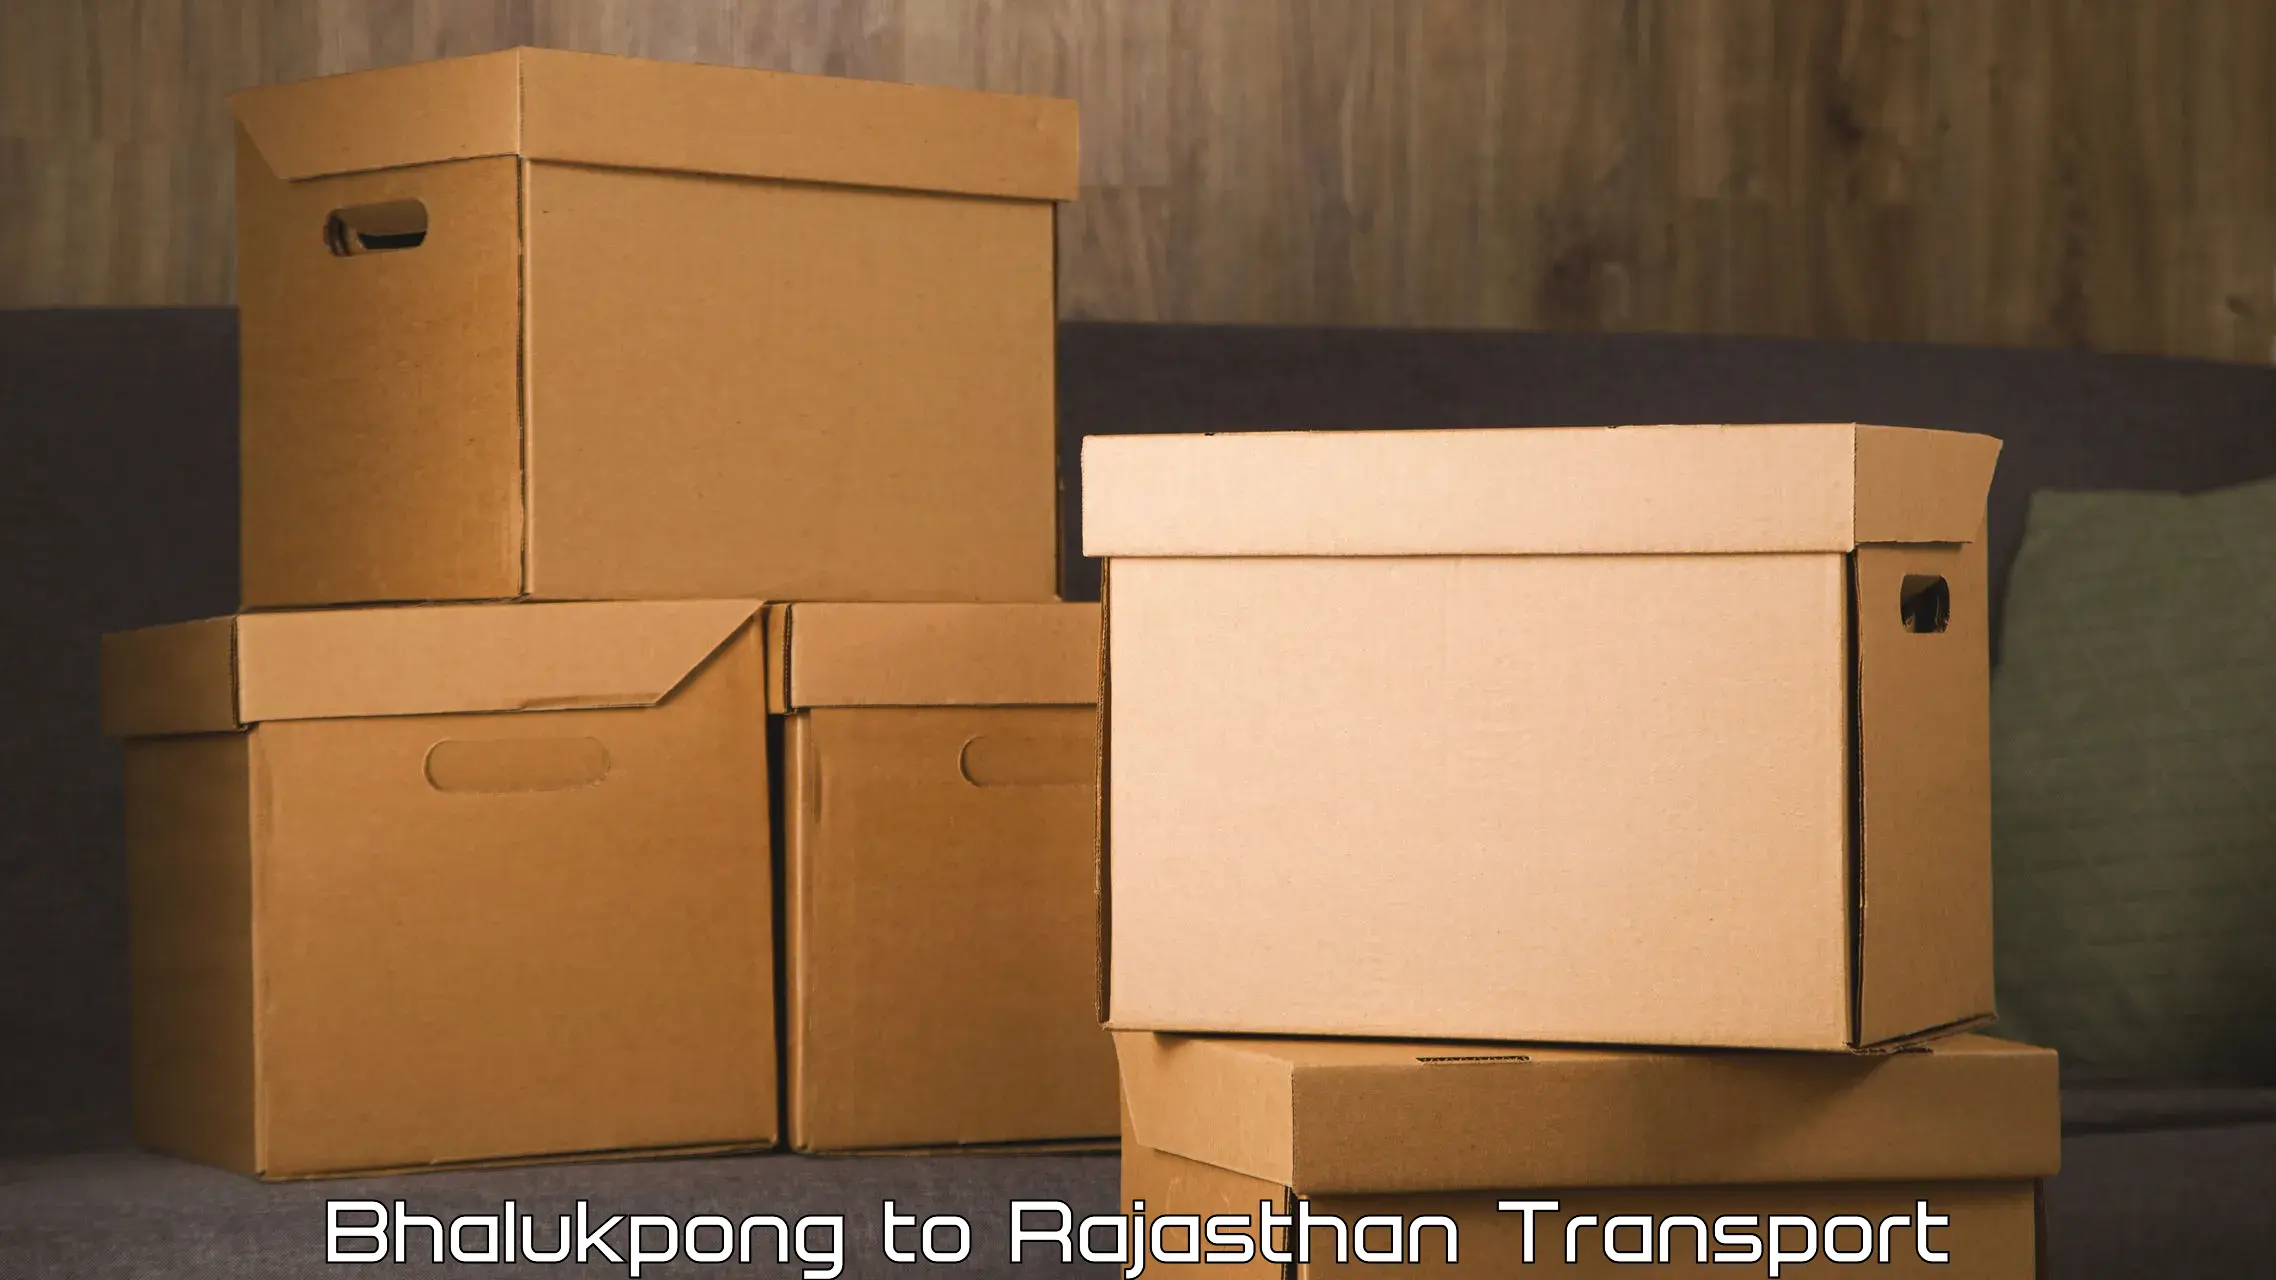 Truck transport companies in India in Bhalukpong to Hindaun